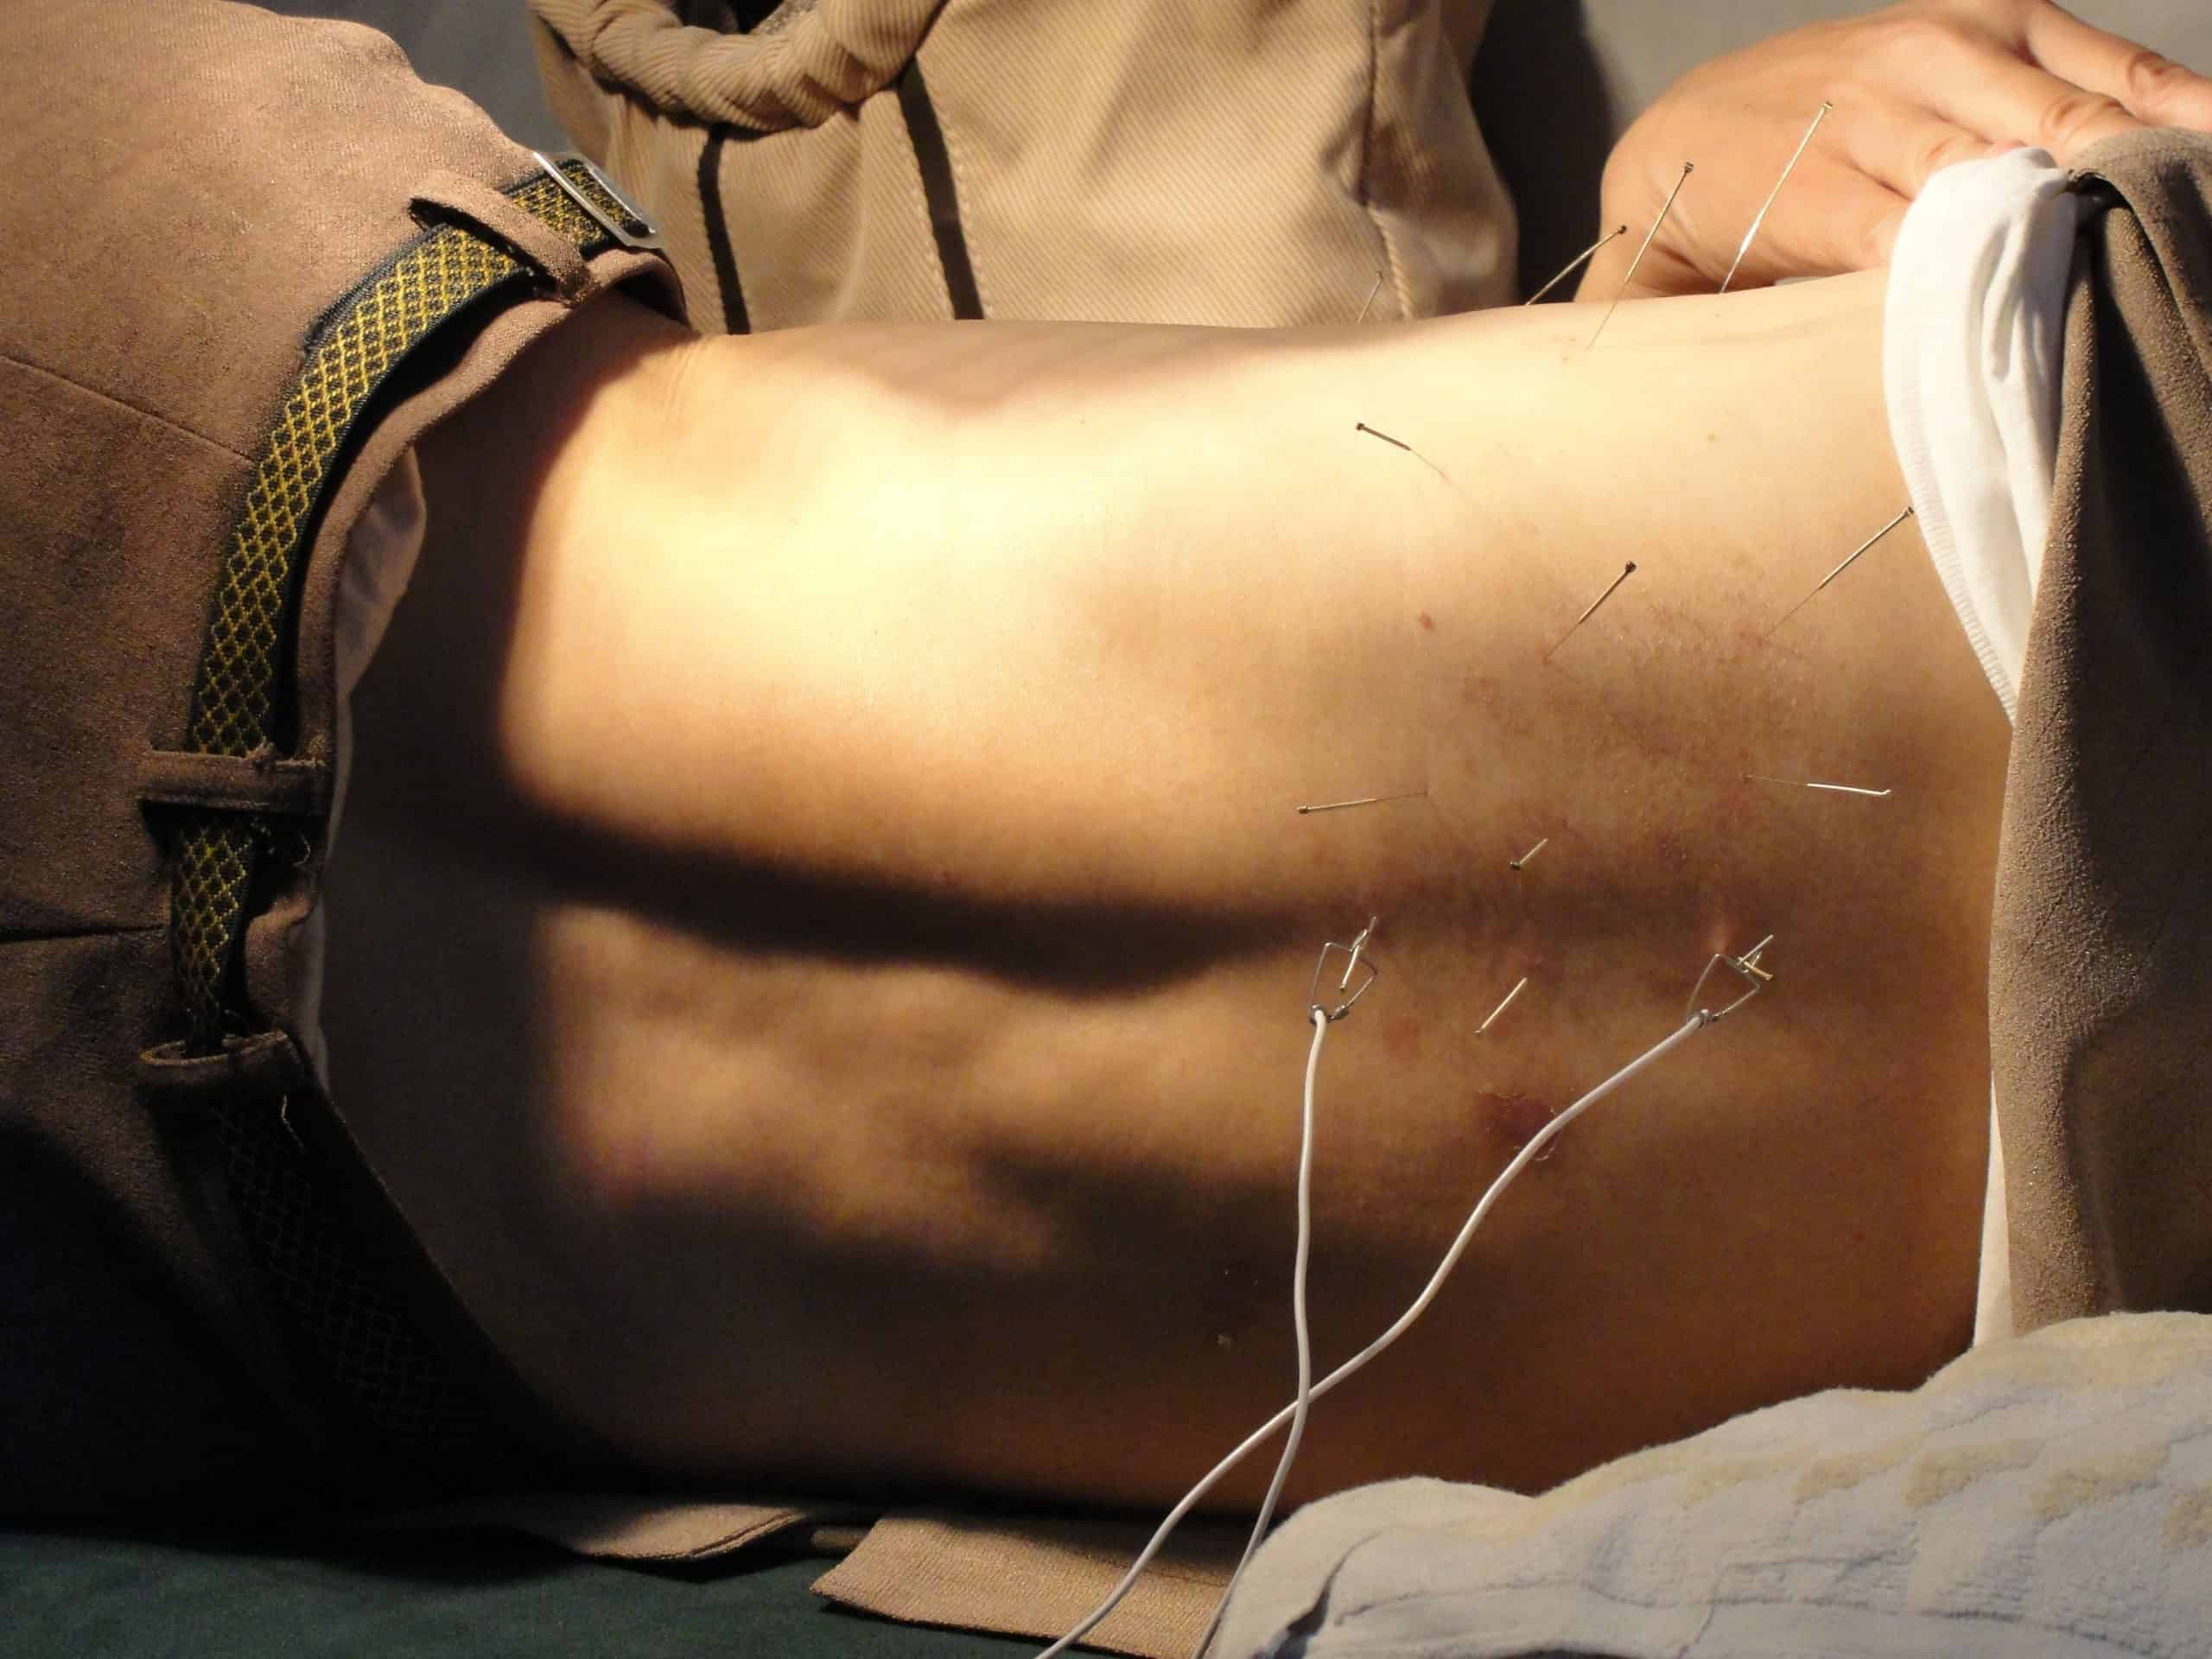 A man lies on his side with no shirt. On his back are a variety of acupuncture needles, some hooked to wires